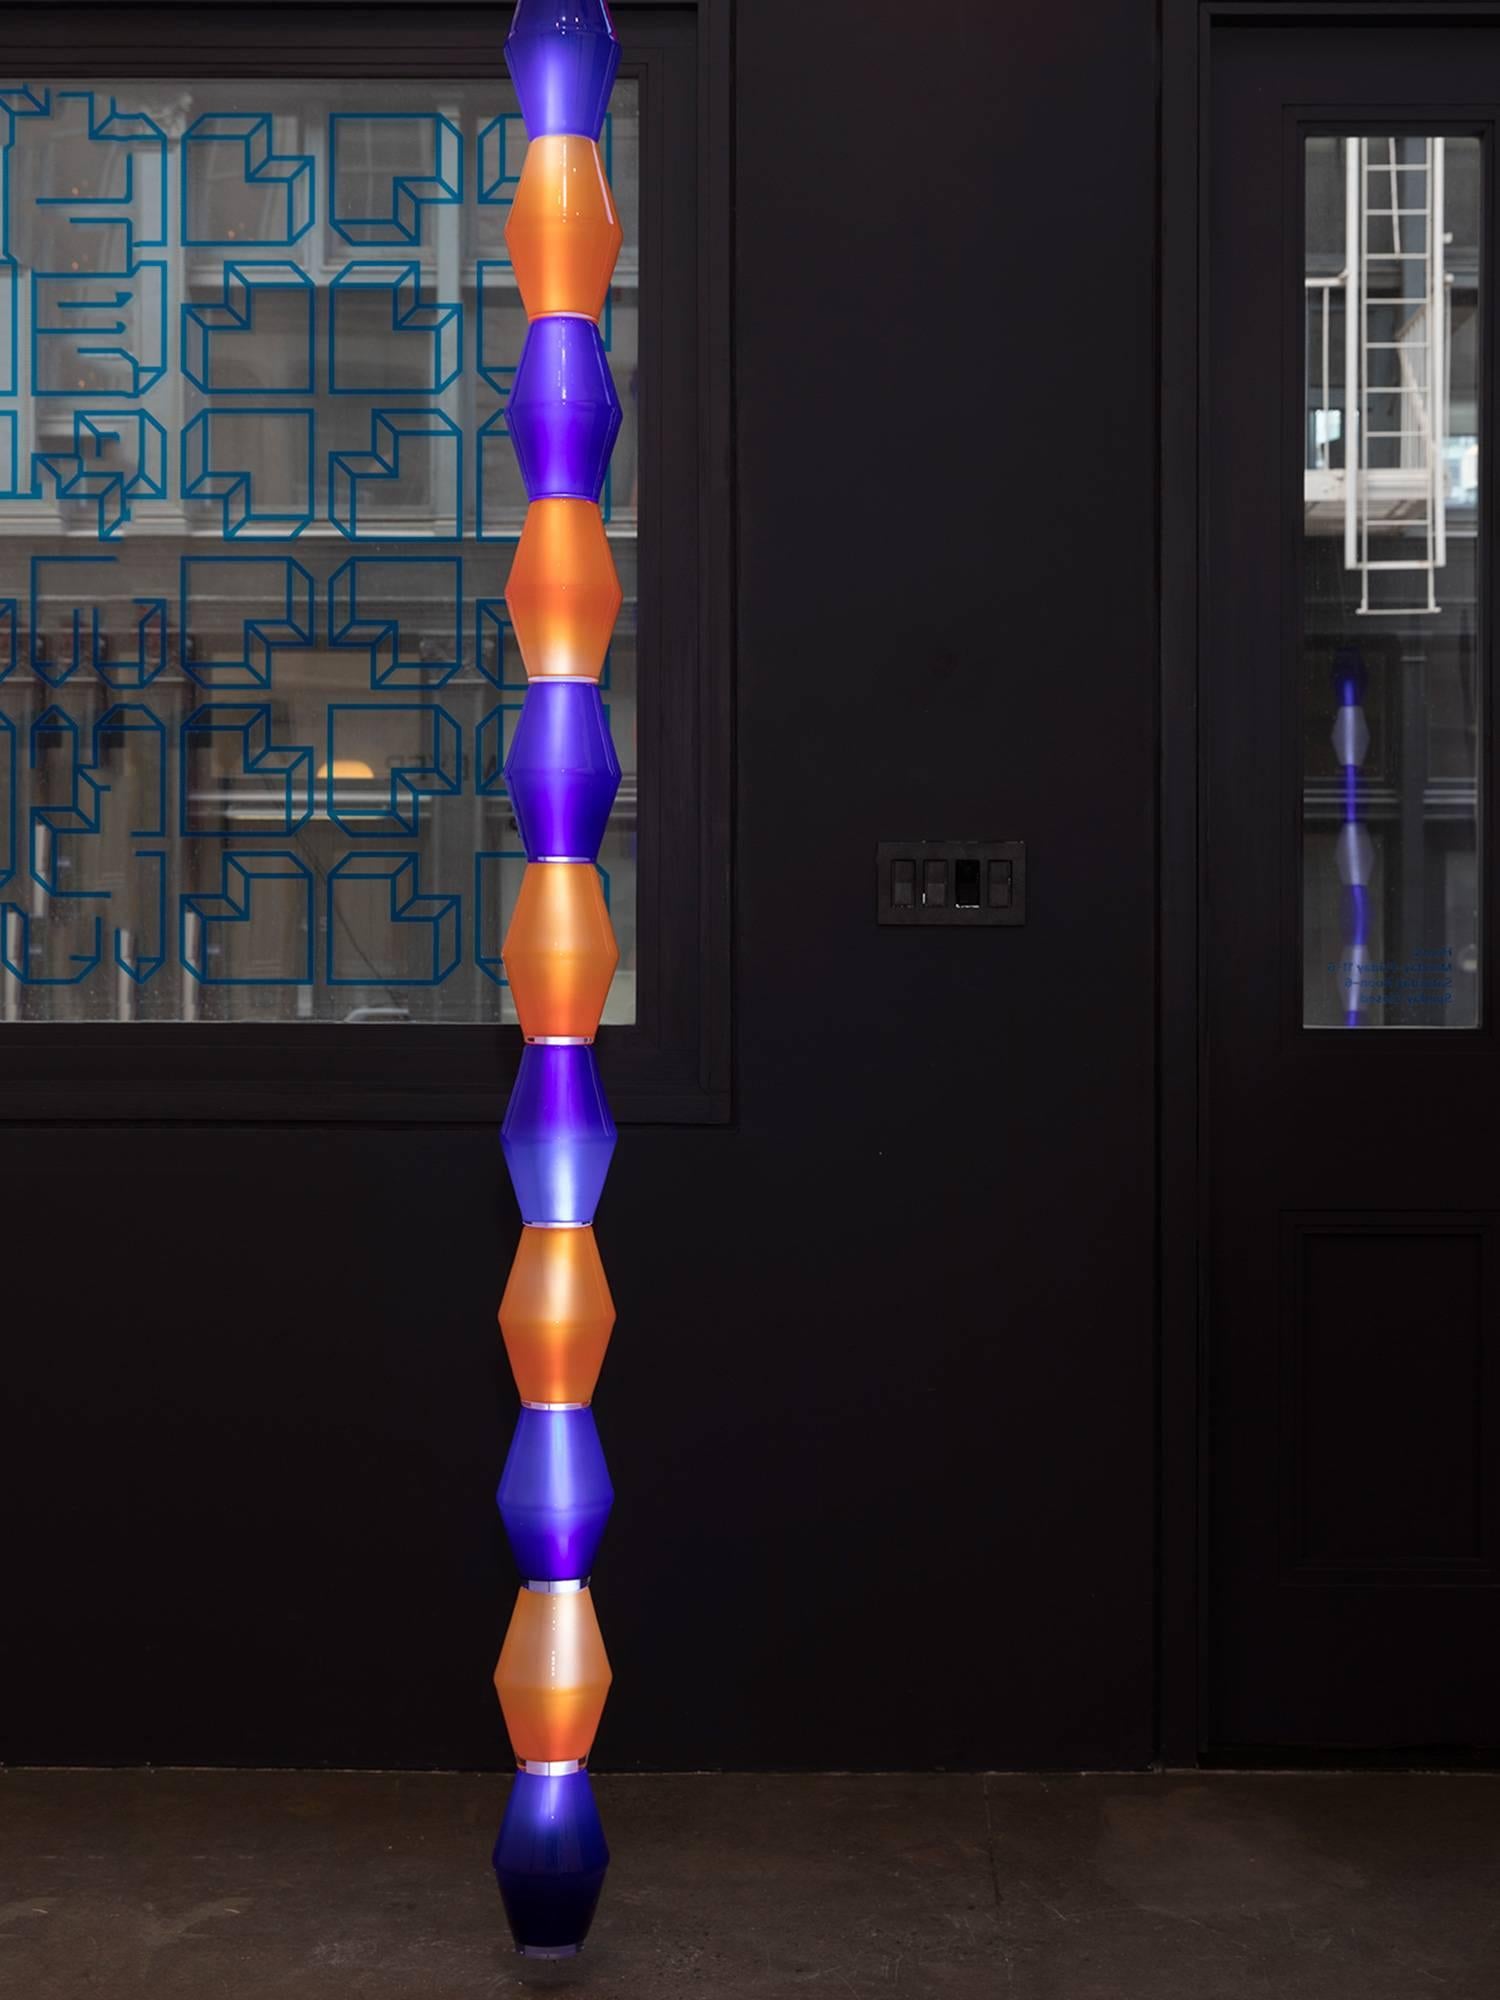 Handcrafted, totemic glass hanging light by Norwegian artist and architect Tron Meyer. The lamp is made of eleven orange and blue glass shapes strung around an LED core, which were hand-blown into a traditional wooden mold in a 200-year-old glass